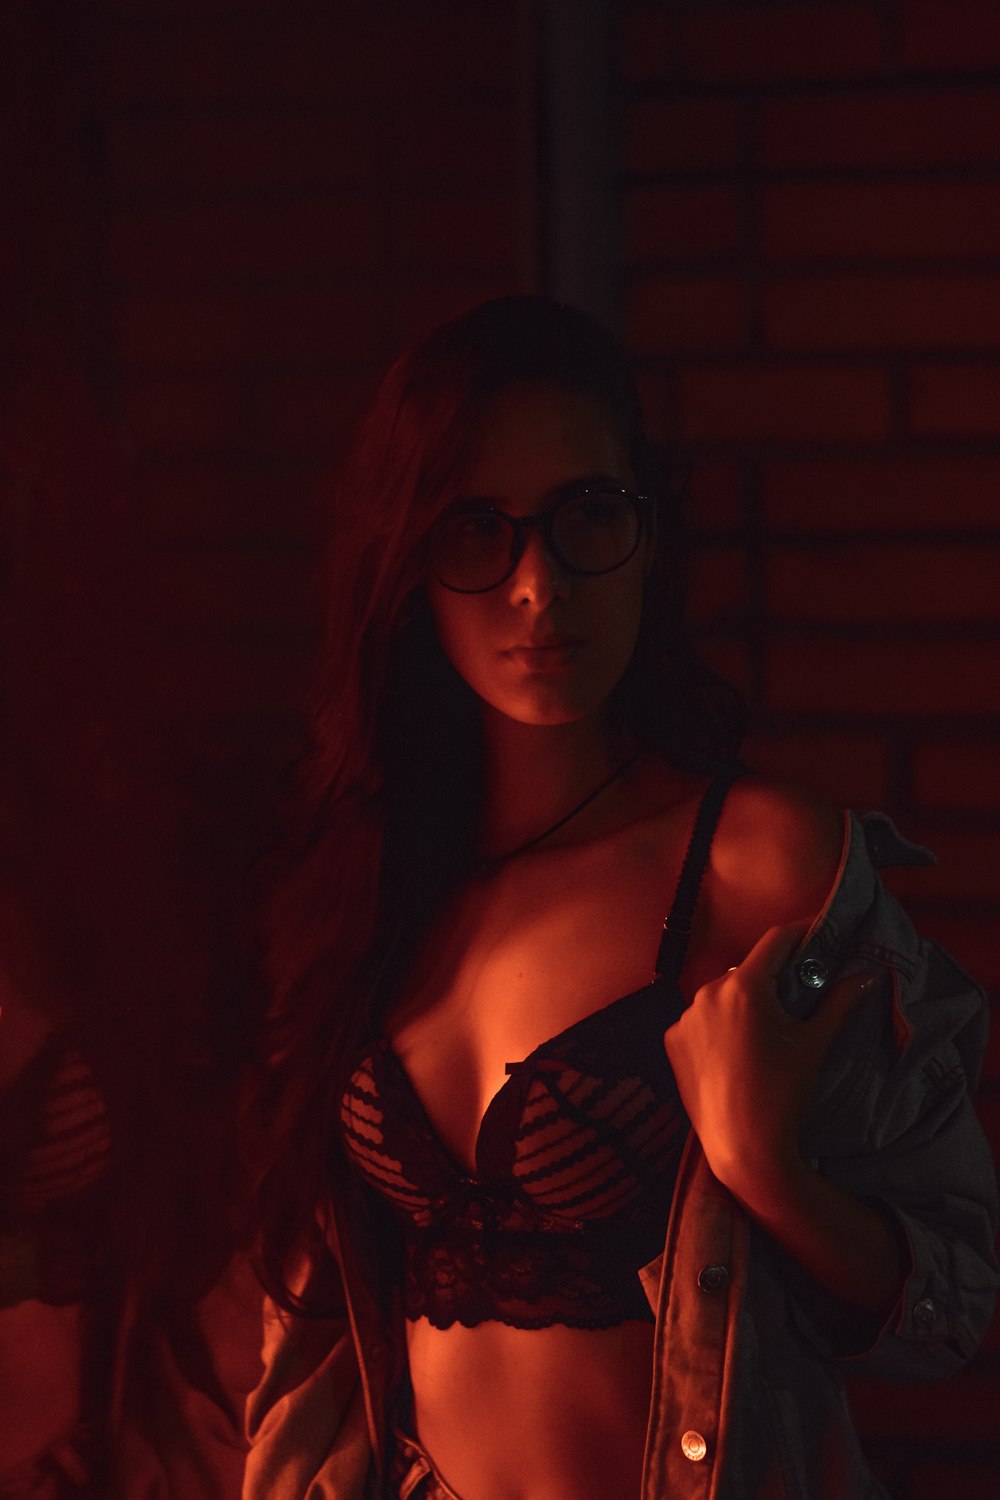 a woman in a bra and jacket standing in a dark room